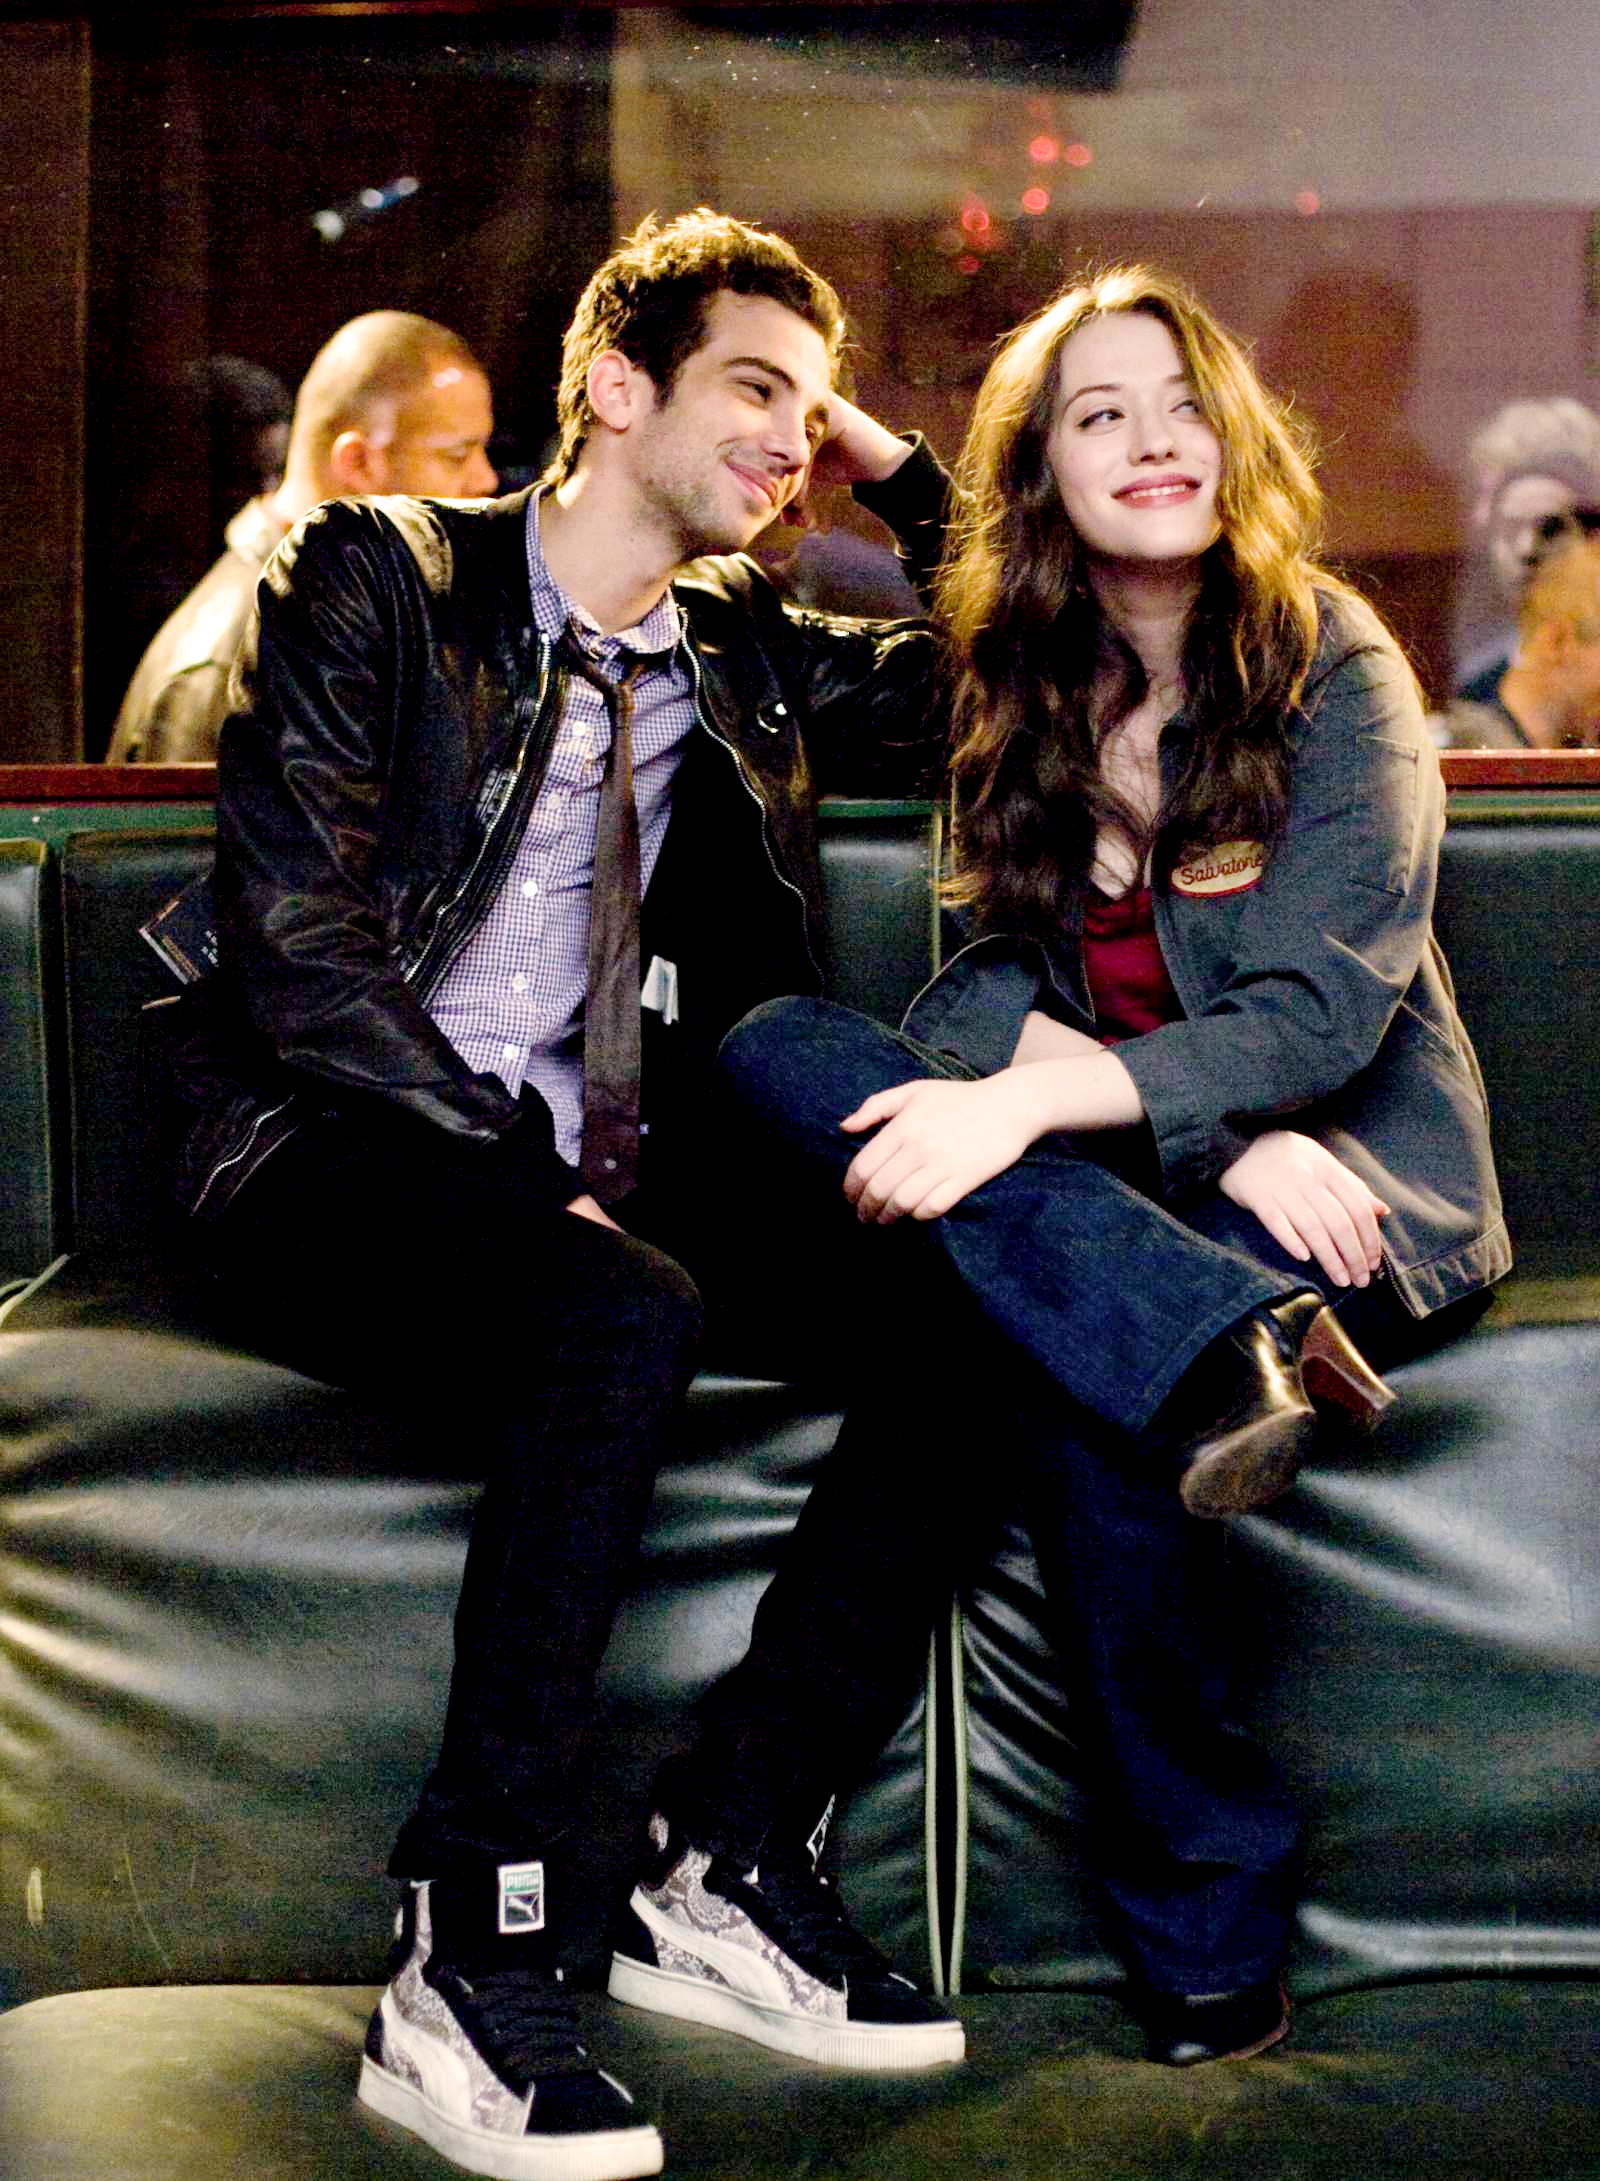 Jay Baruchel stars as Tal and Kat Dennings stars as Norah in Sony Pictures' Nick and Norah's Infinite Playlist (2008). Photo credit by K.C. Bailey.